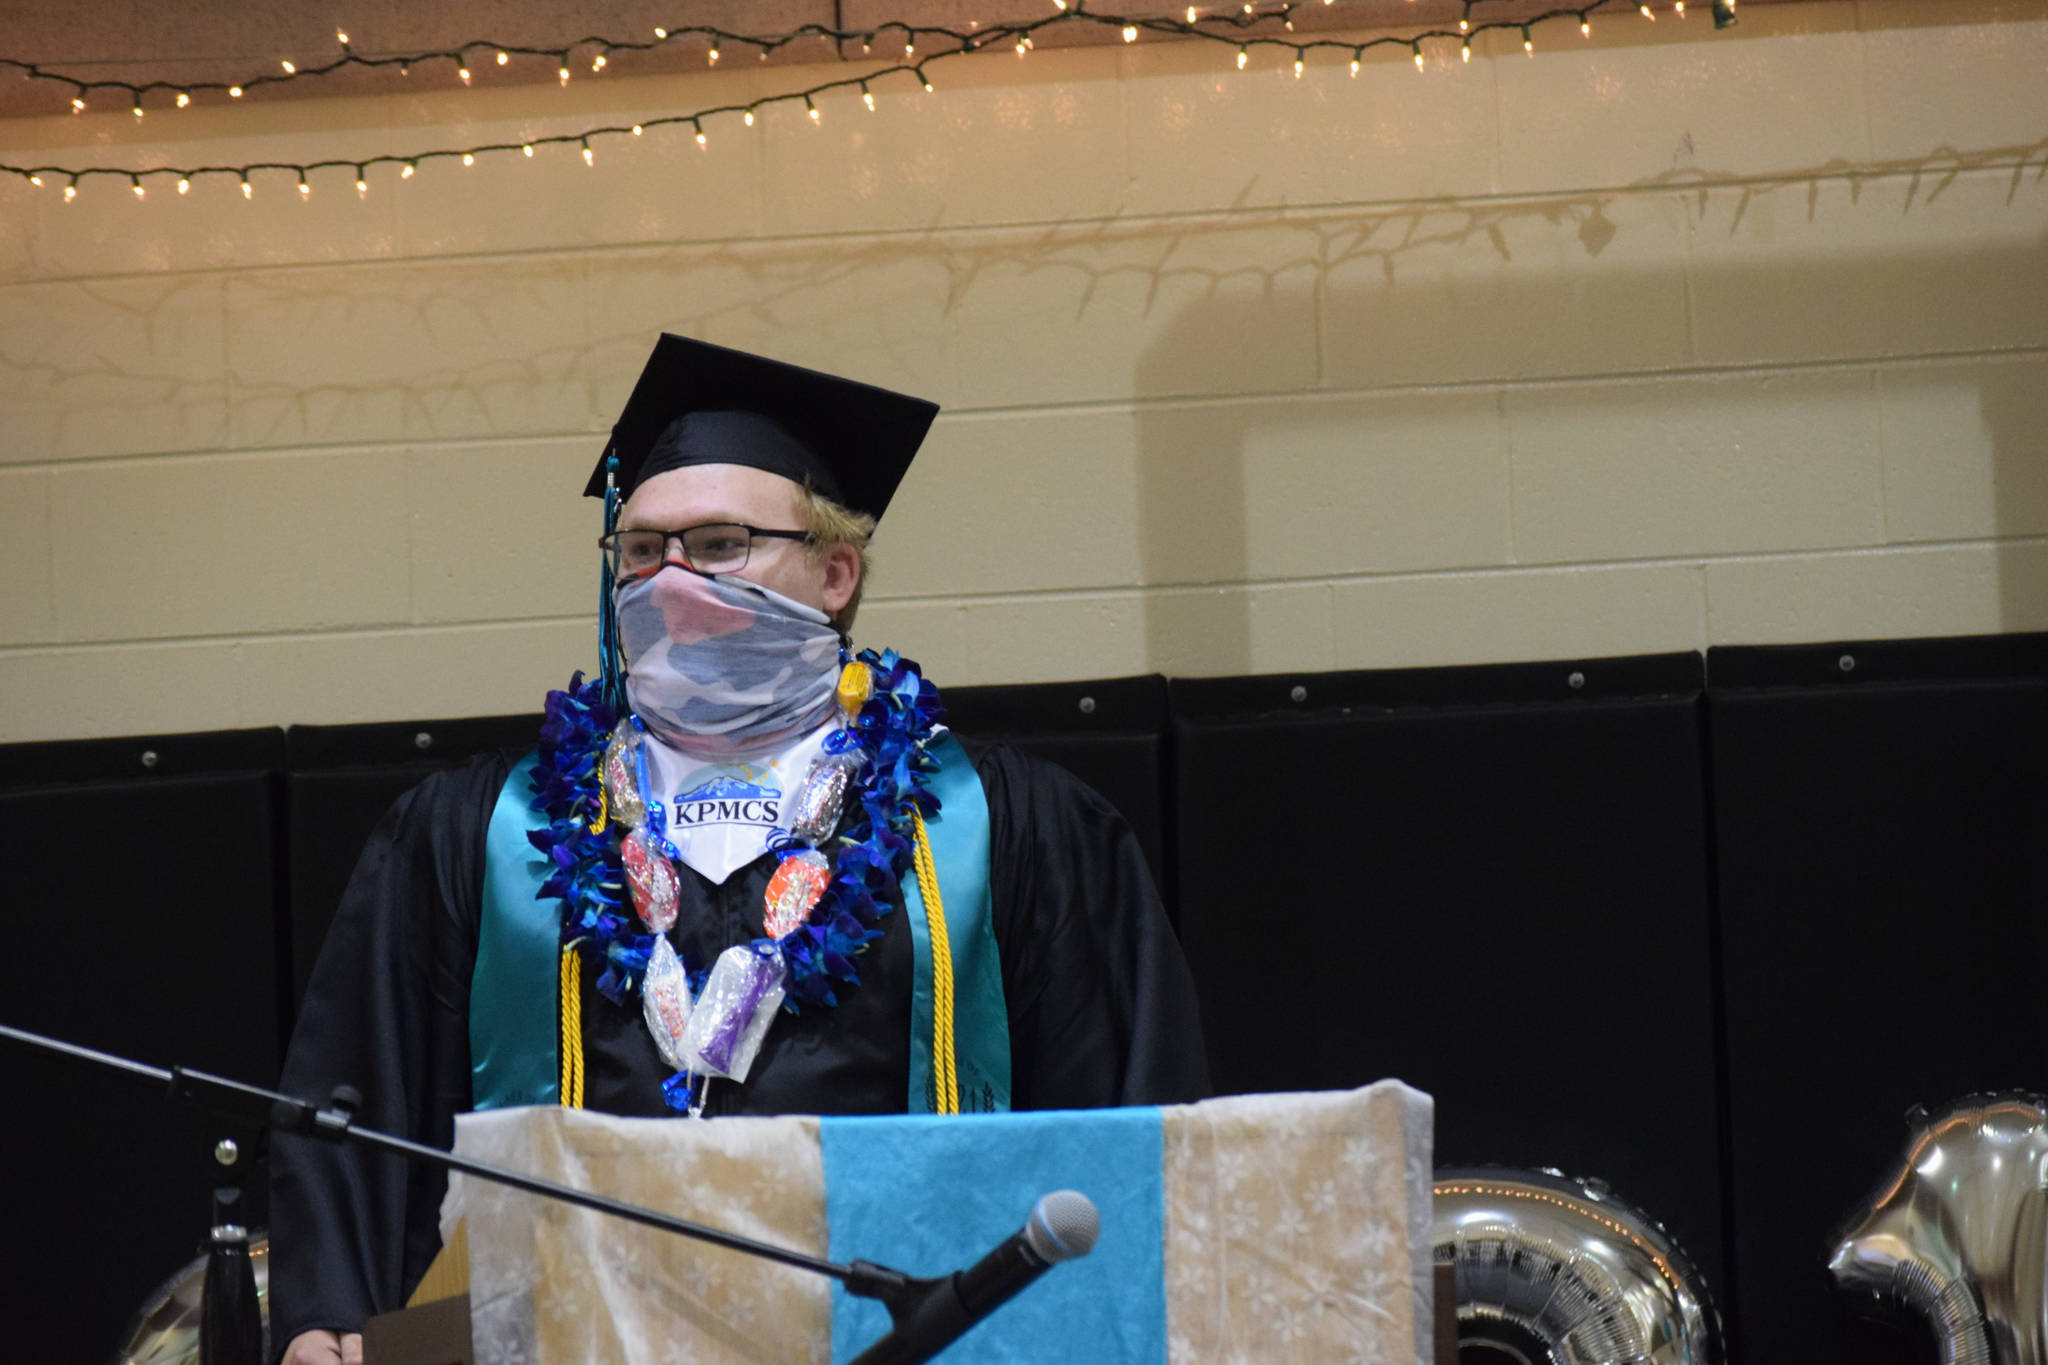 Maxwell Rogers speaks at the River City Academy graduation in Soldotna, Alaska on Monday, May 17, 2021. He graduated from the Kenai Peninsula Middle College. (Camille Botello / Peninsula Clarion)